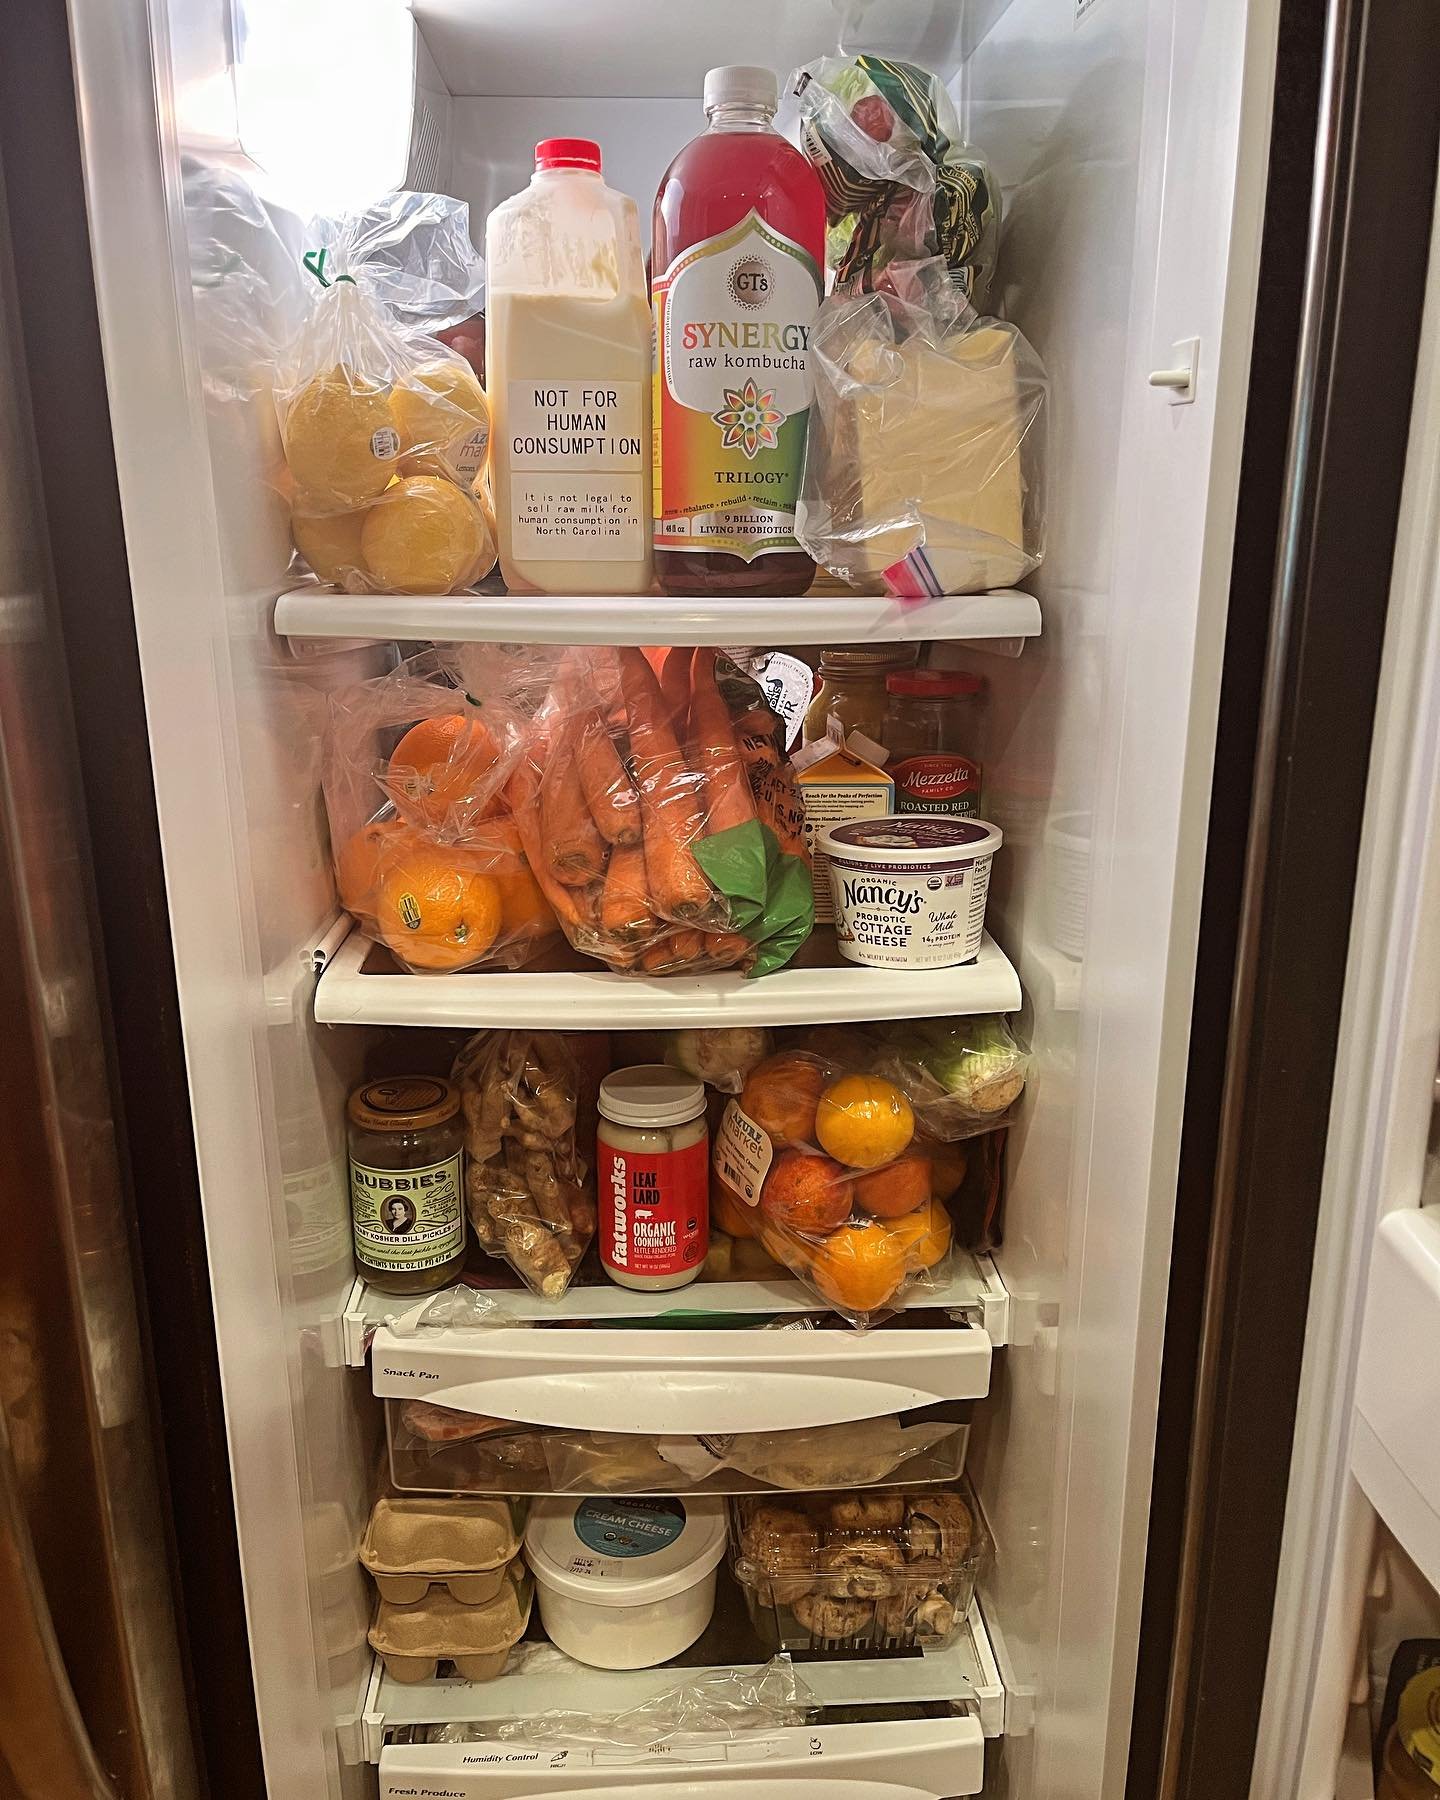 I thought I&rsquo;d post an updated view of my refrigerator since I&rsquo;ve been shopping at basically two places, @azurestandard and @yonderwnc, a local market focusing on local, nutrient dense and ethically sourced foods. I get meat products such 